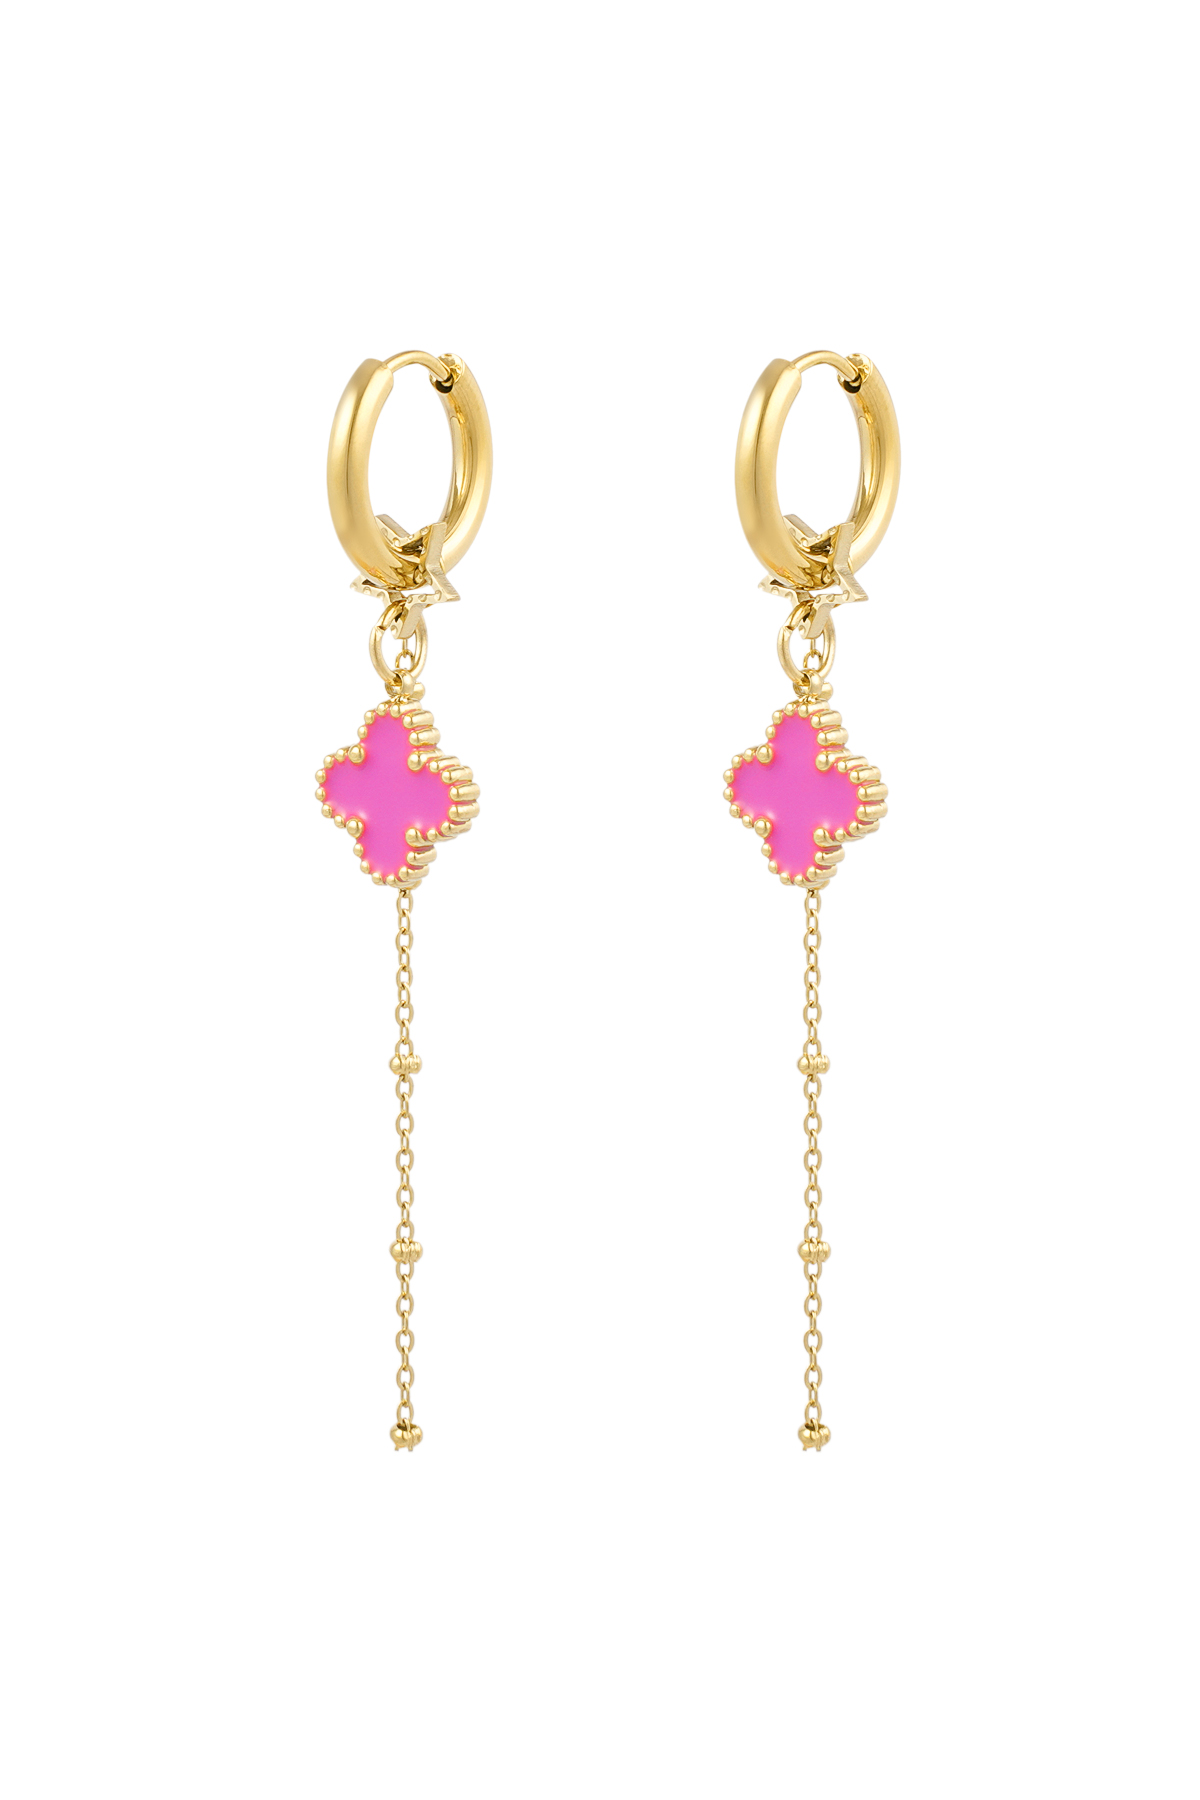 Earrings clover night - pink gold